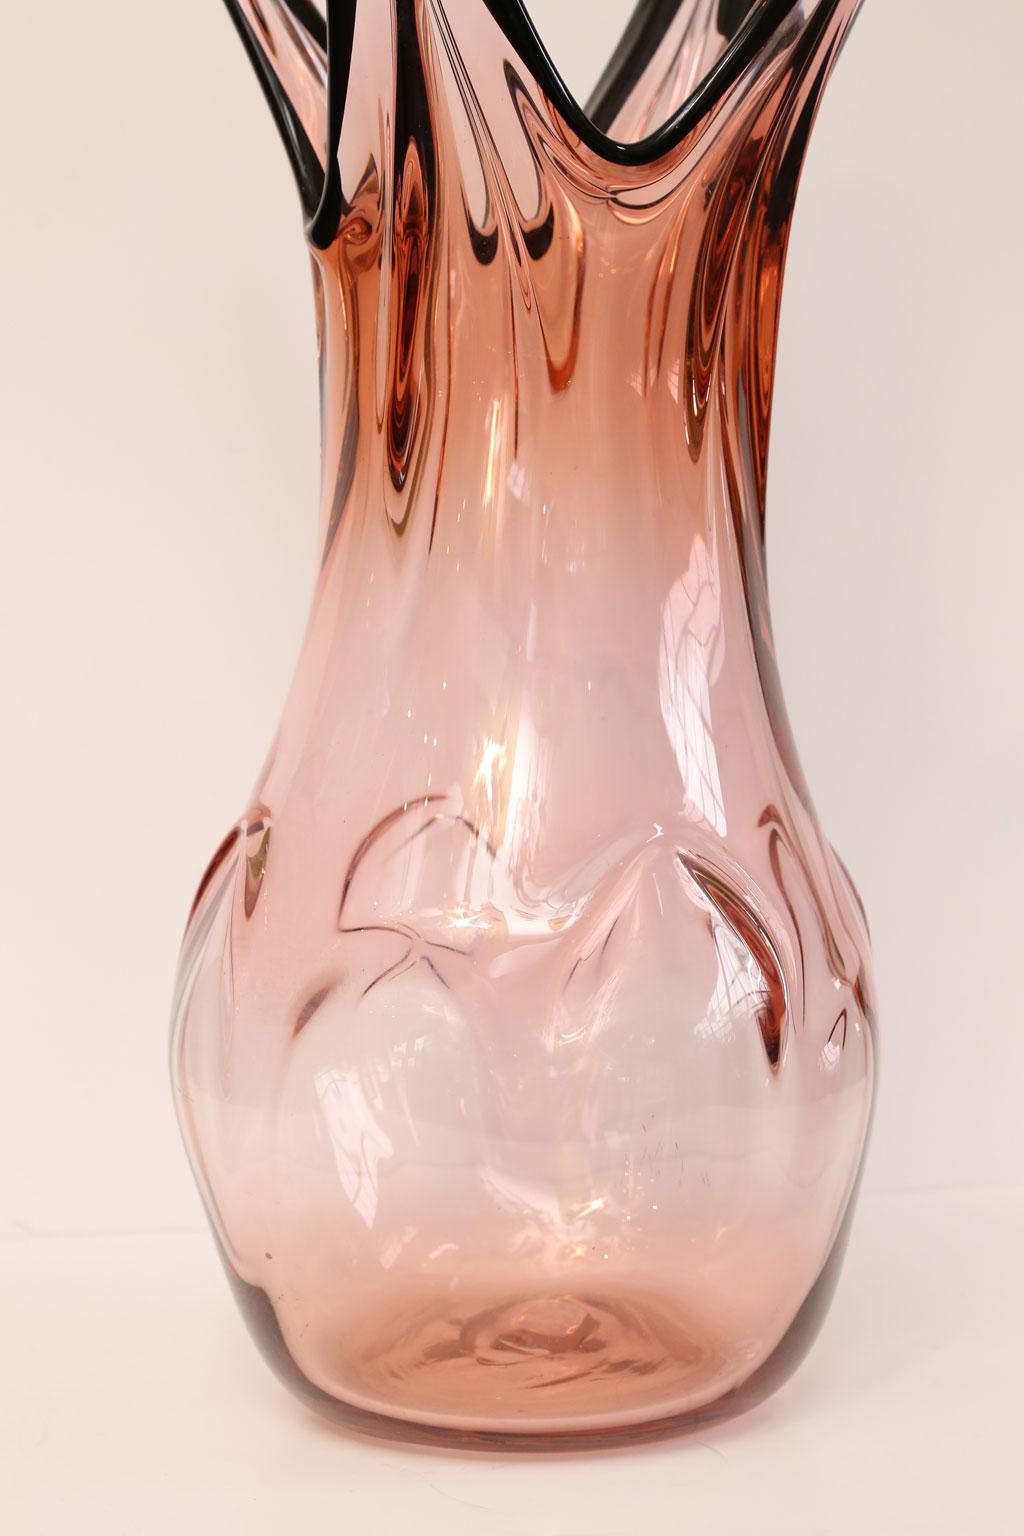 Midcentury pink glass vase with nice scale and simple, decorative shape.  Val St Lambert.

The vase is of very large and a striking size.